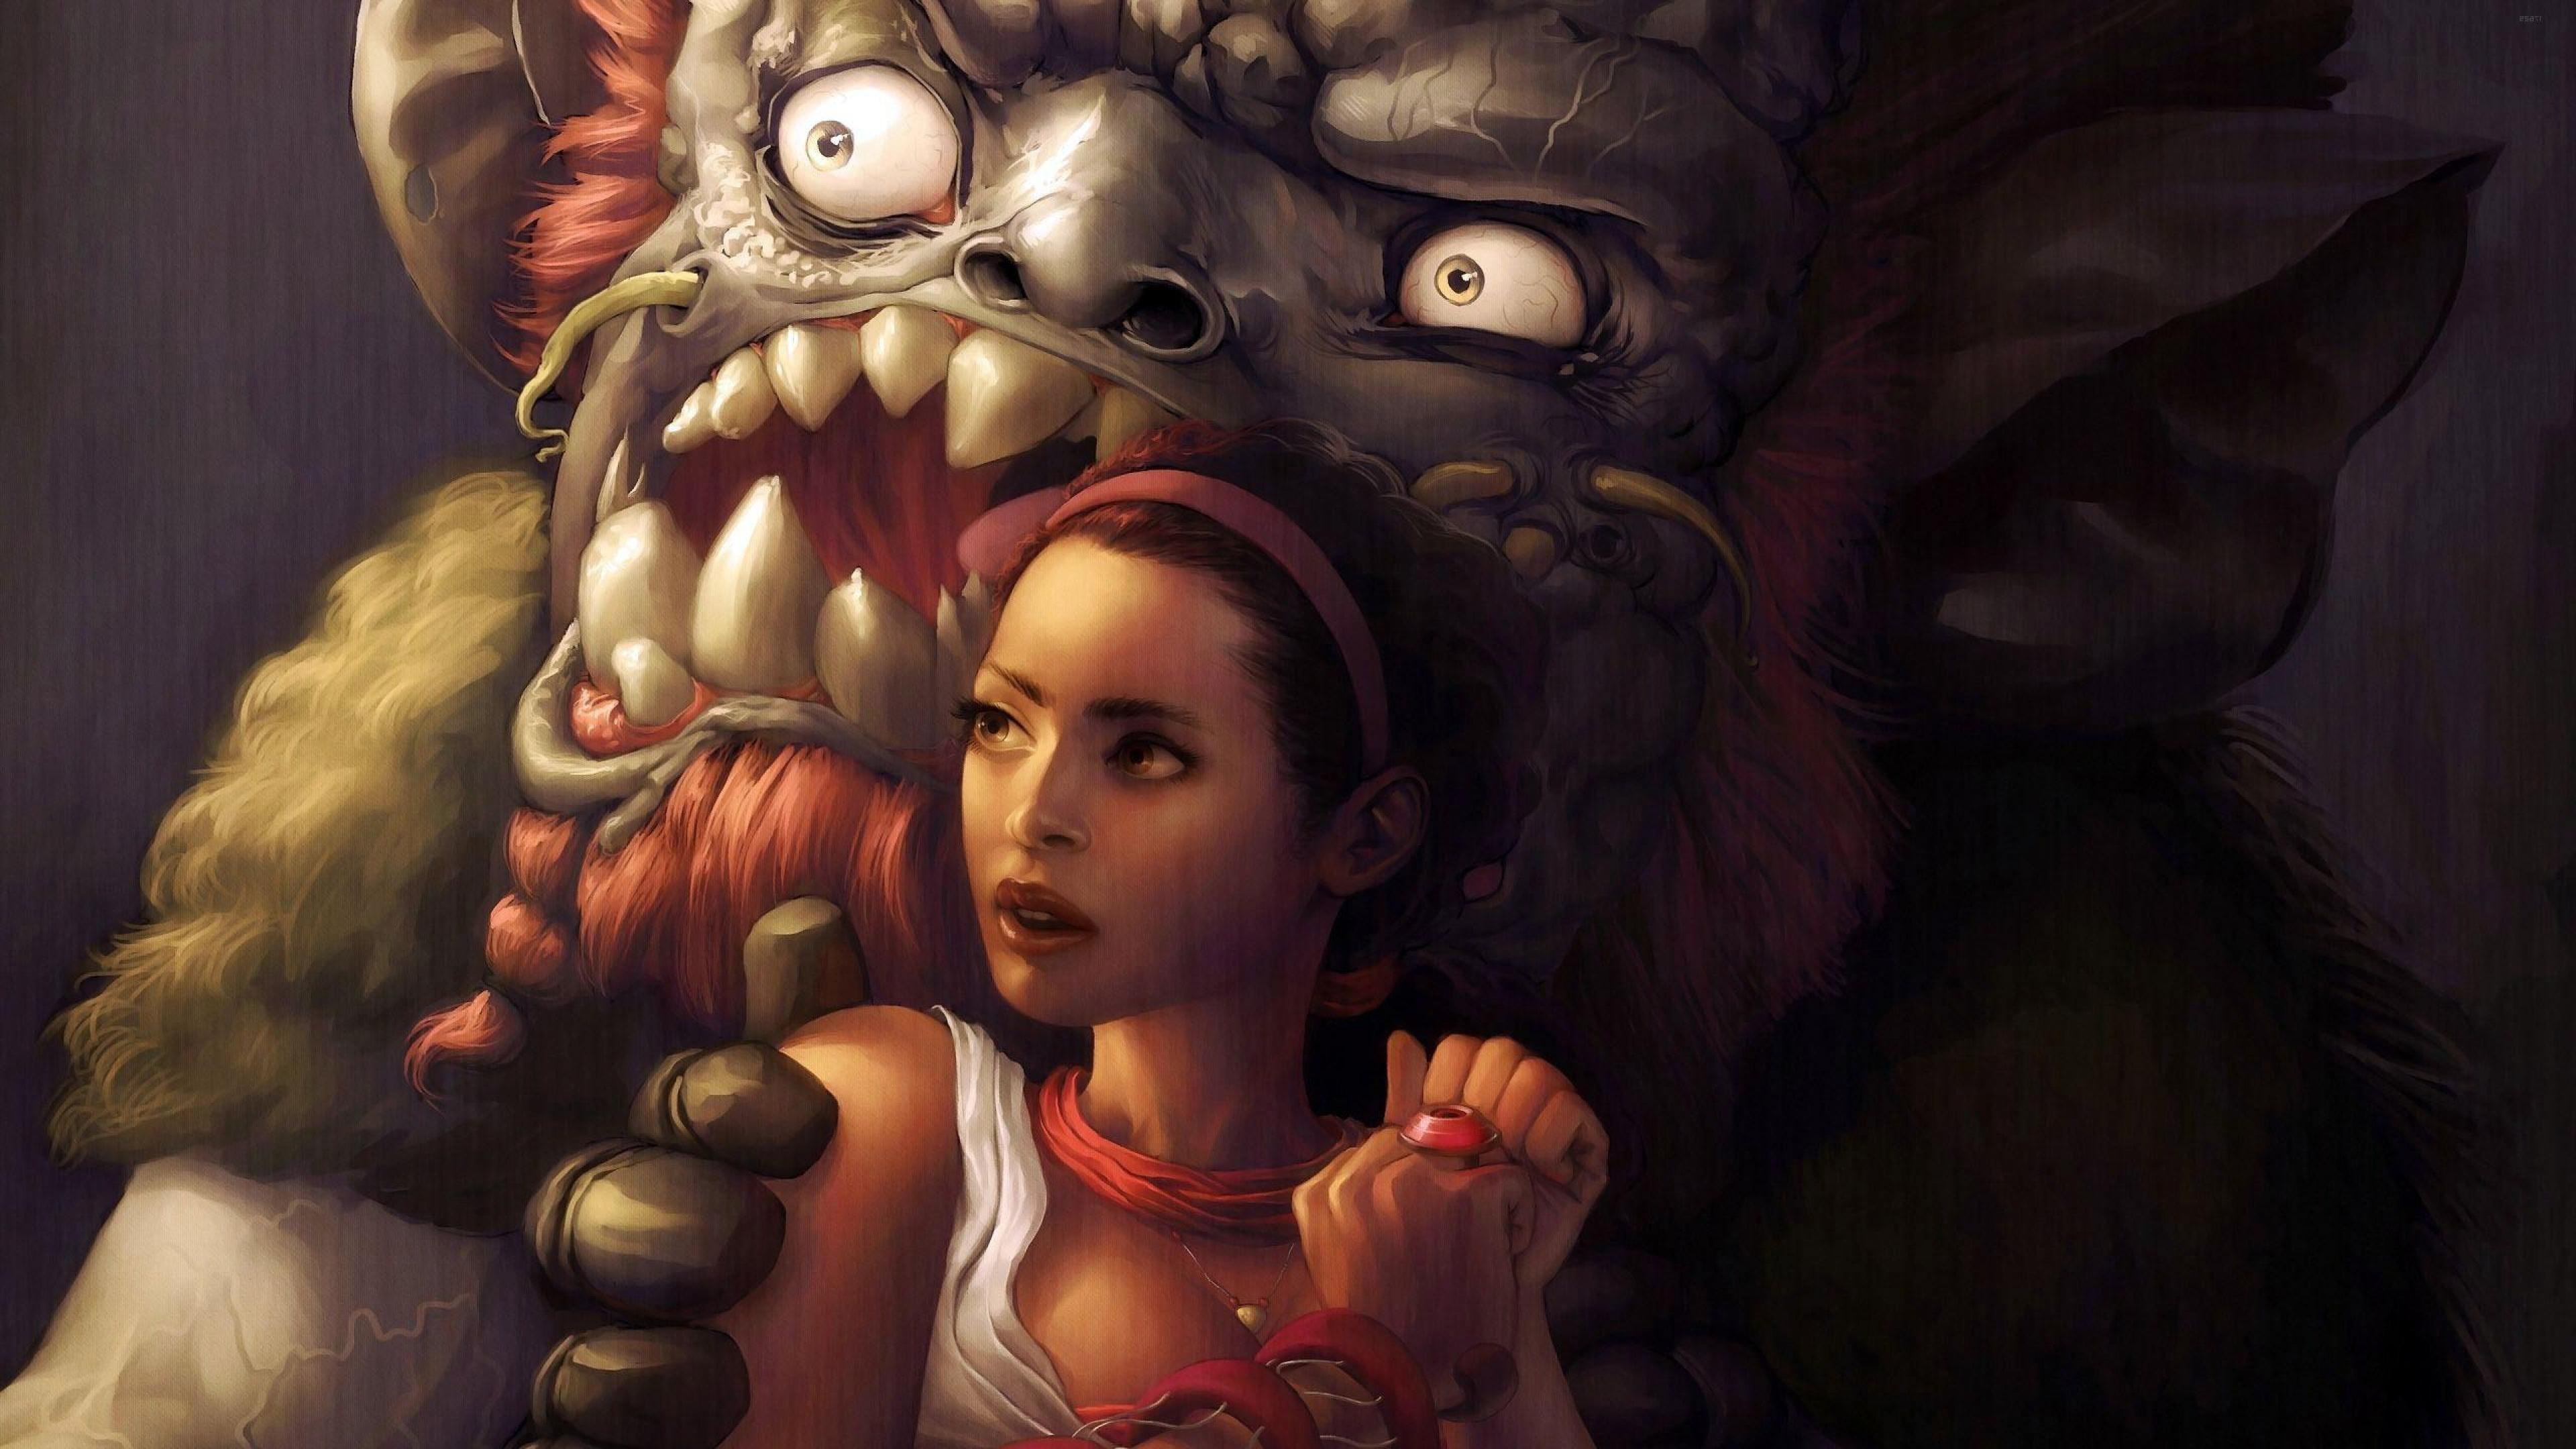 3840x2160 friendship between monster and girl woman fantasy monster ...